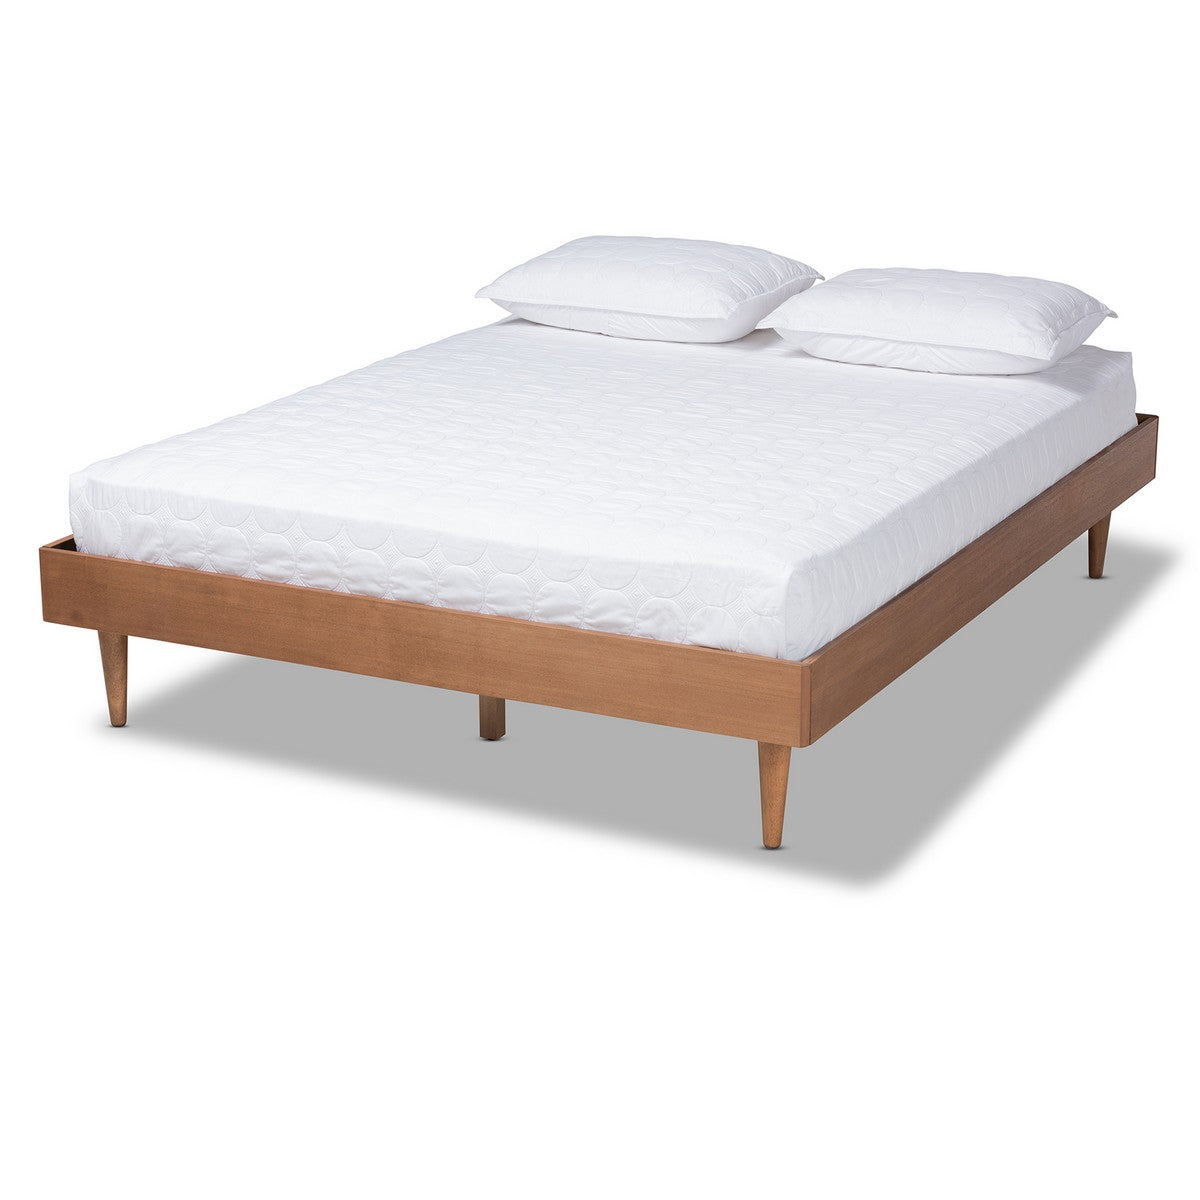 Baxton Studio Rina Mid-Century Modern Ash Wanut Finished Queen Size Wood Bed Frame Baxton Studio- Bed Frames-Minimal And Modern - 1